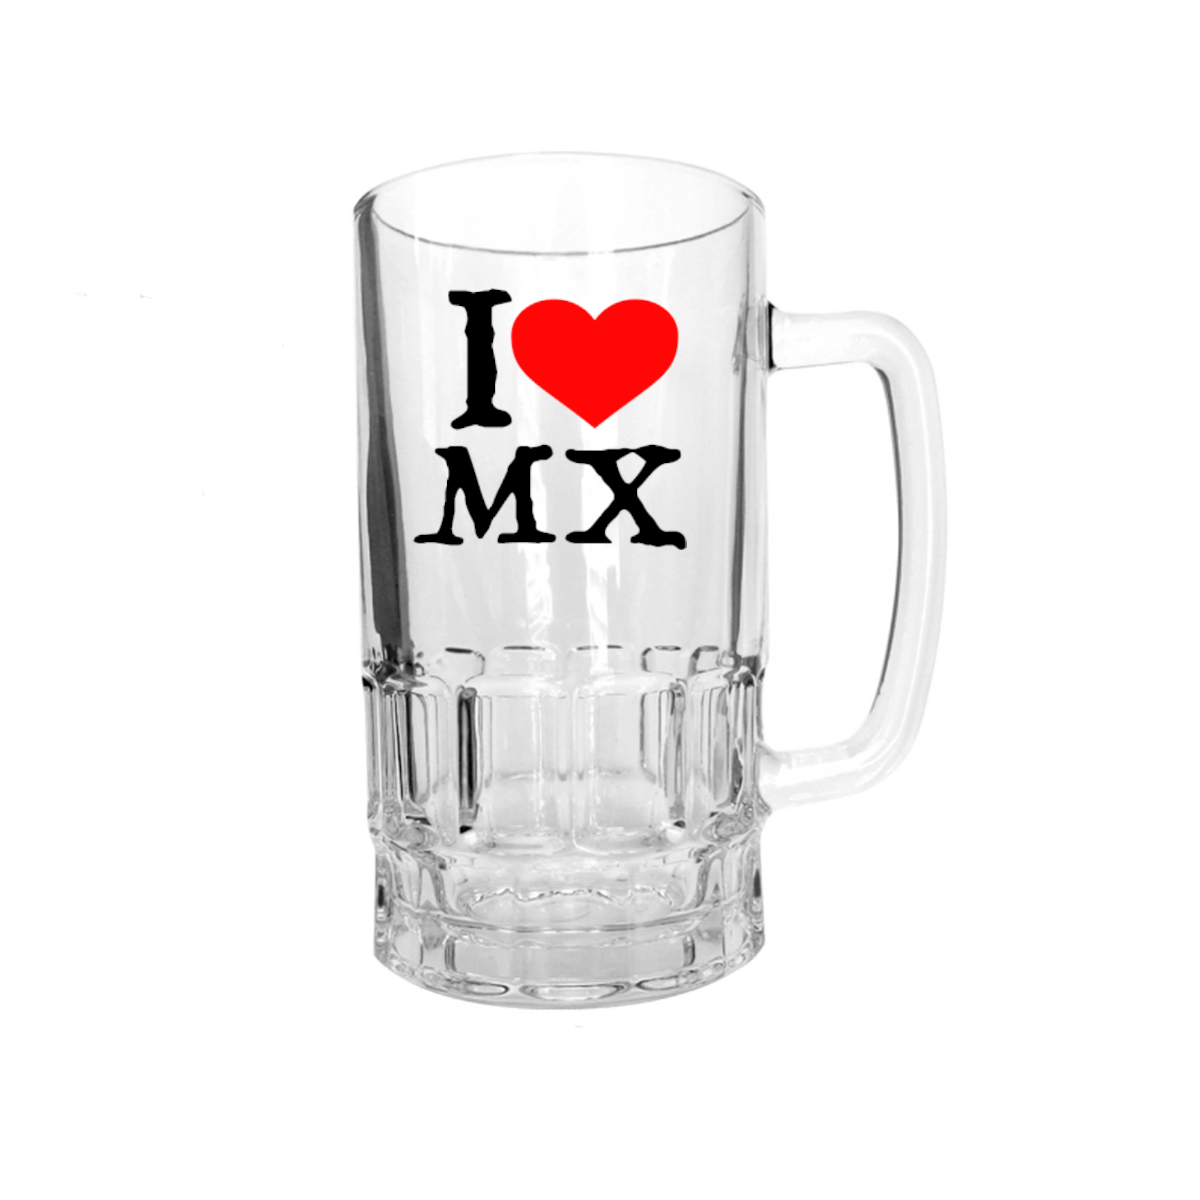 I Love Mexico 16oz Glass Beer Stein